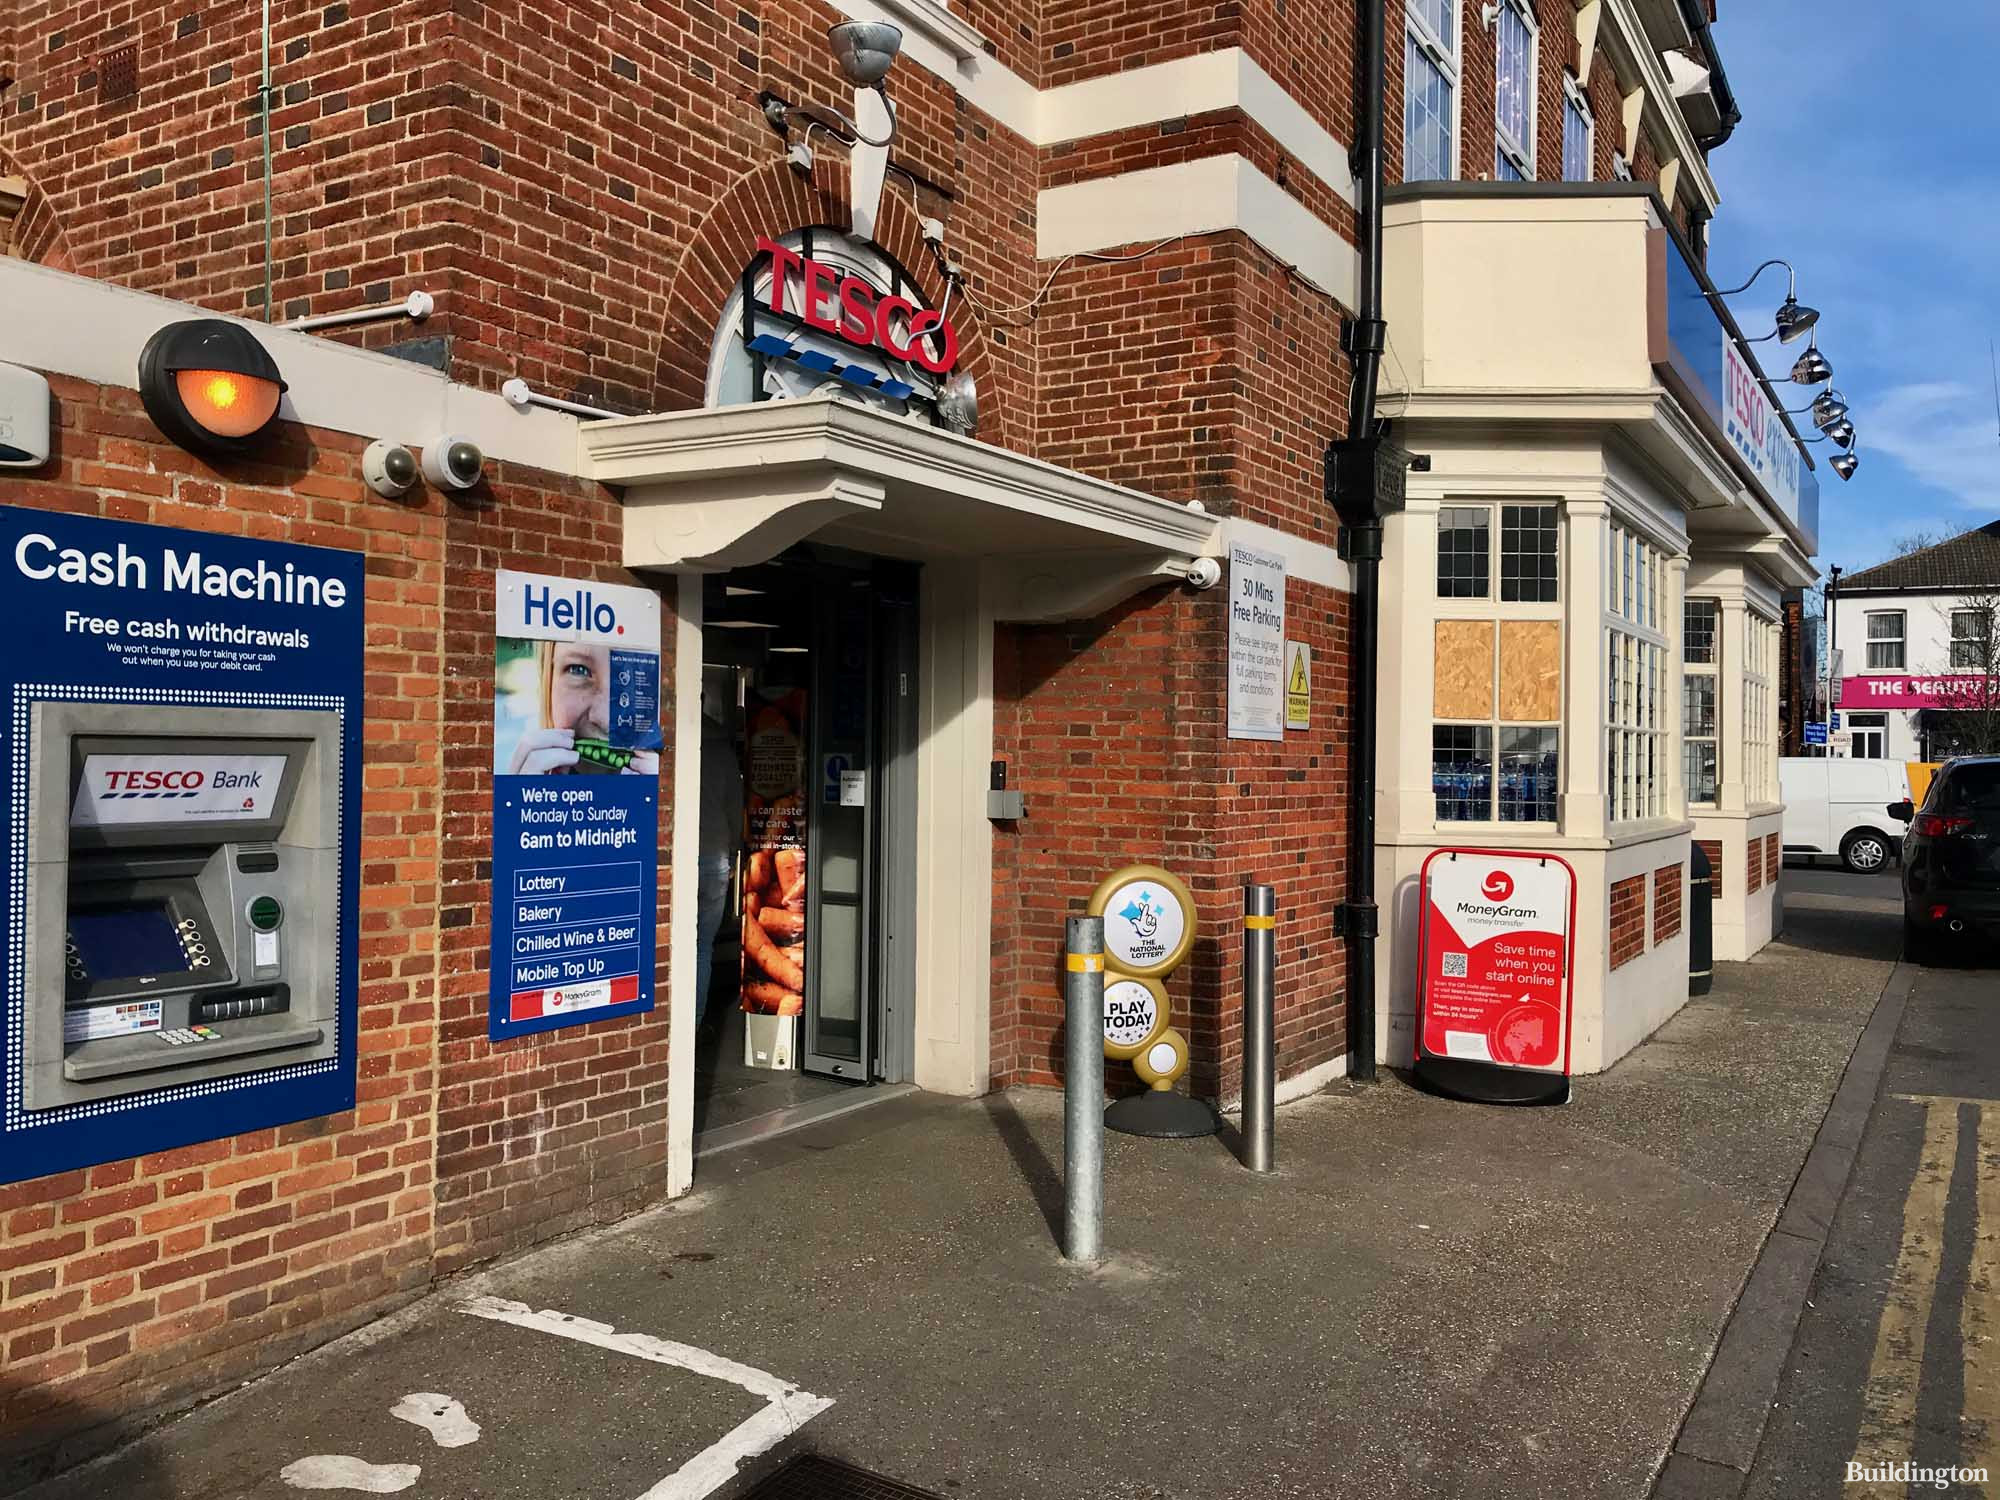 Entrance to Tesco Express store at 86 East Lane in North Wembley, London HA0.